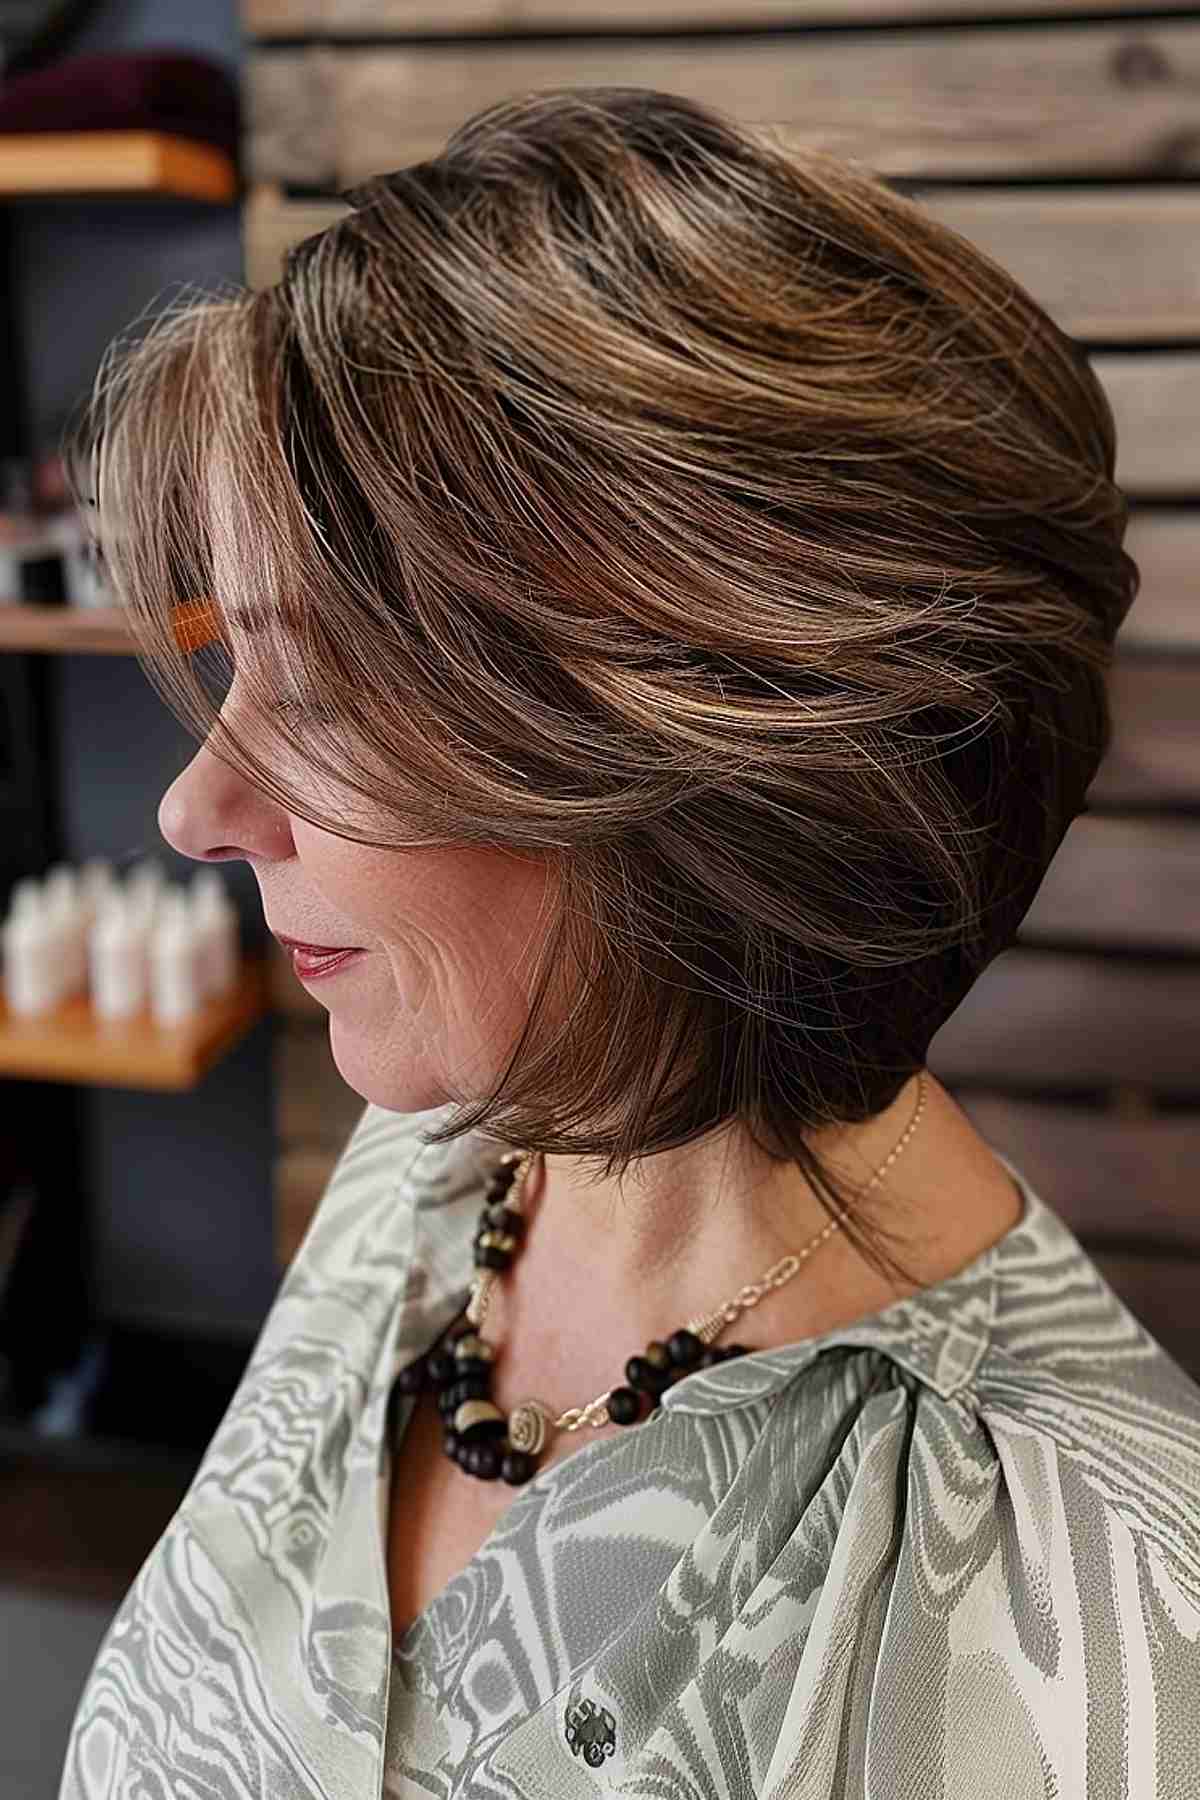 Layered bob haircut for women over 50 with side-swept bangs